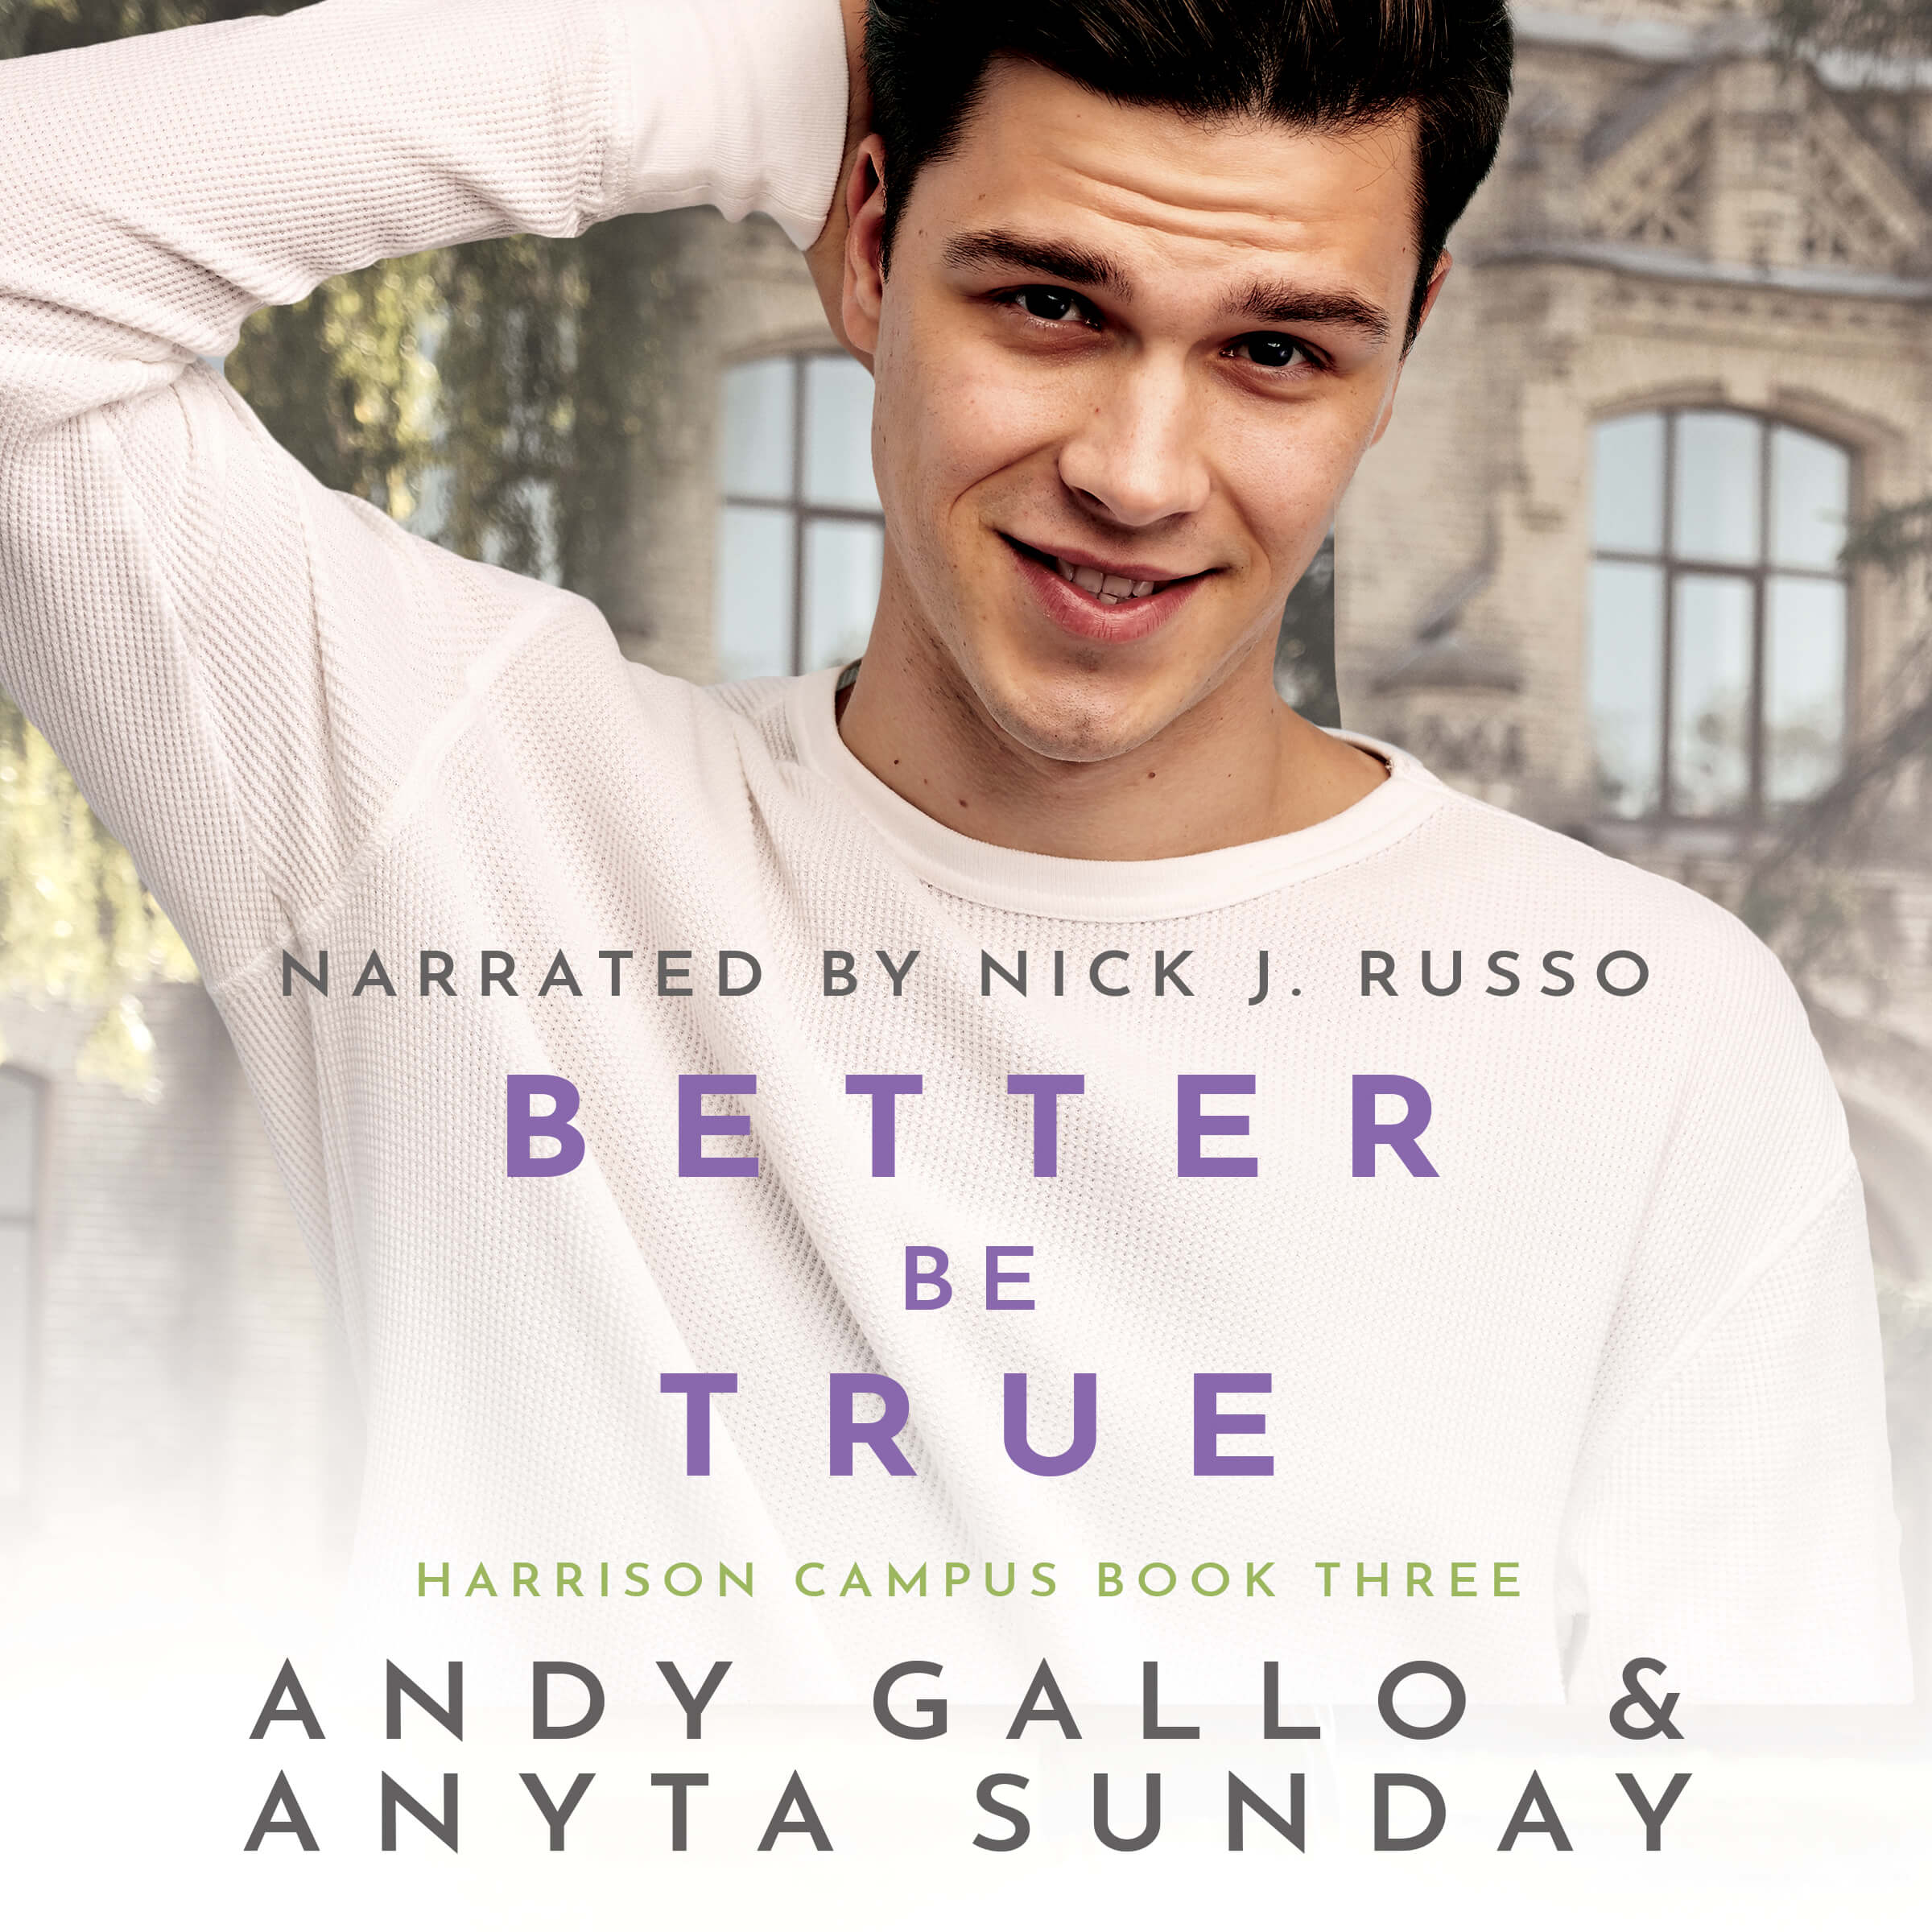 Audiobook of Gay Romance Novel Better be True by Anyta Sunday and Andy Gallo